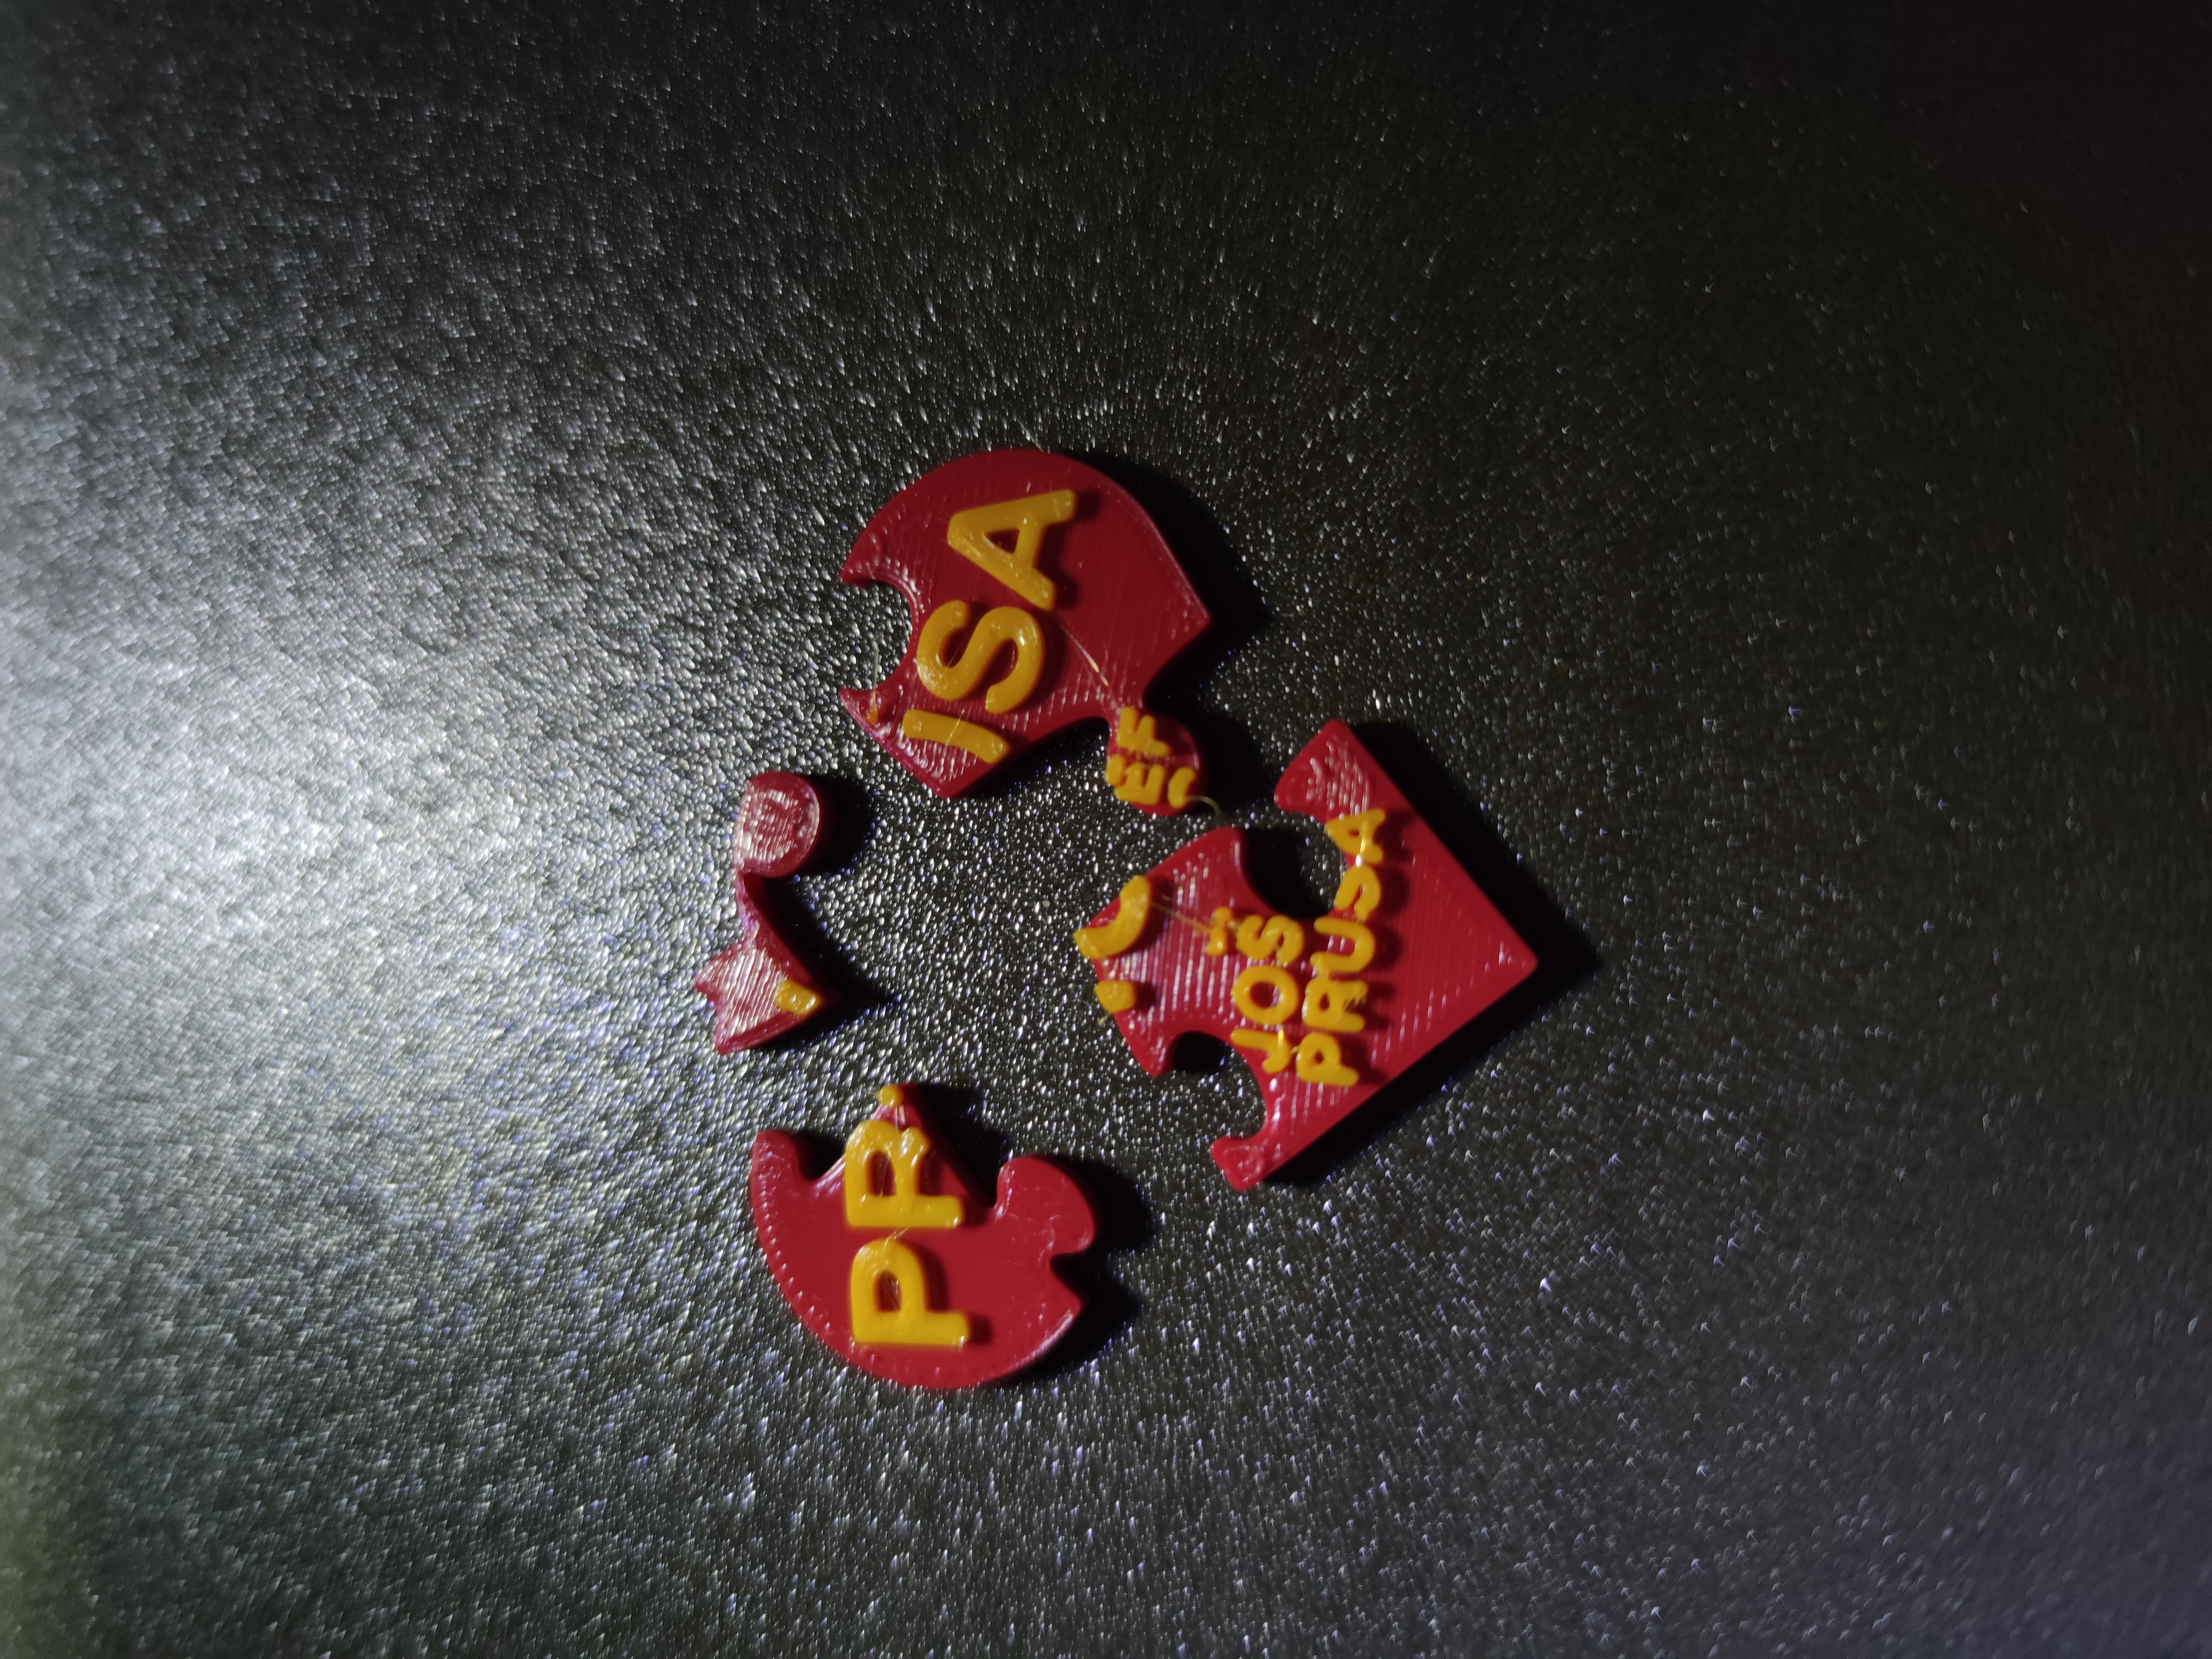 Puzzle in Heart shape with "PRUSA by Josef Prusa"